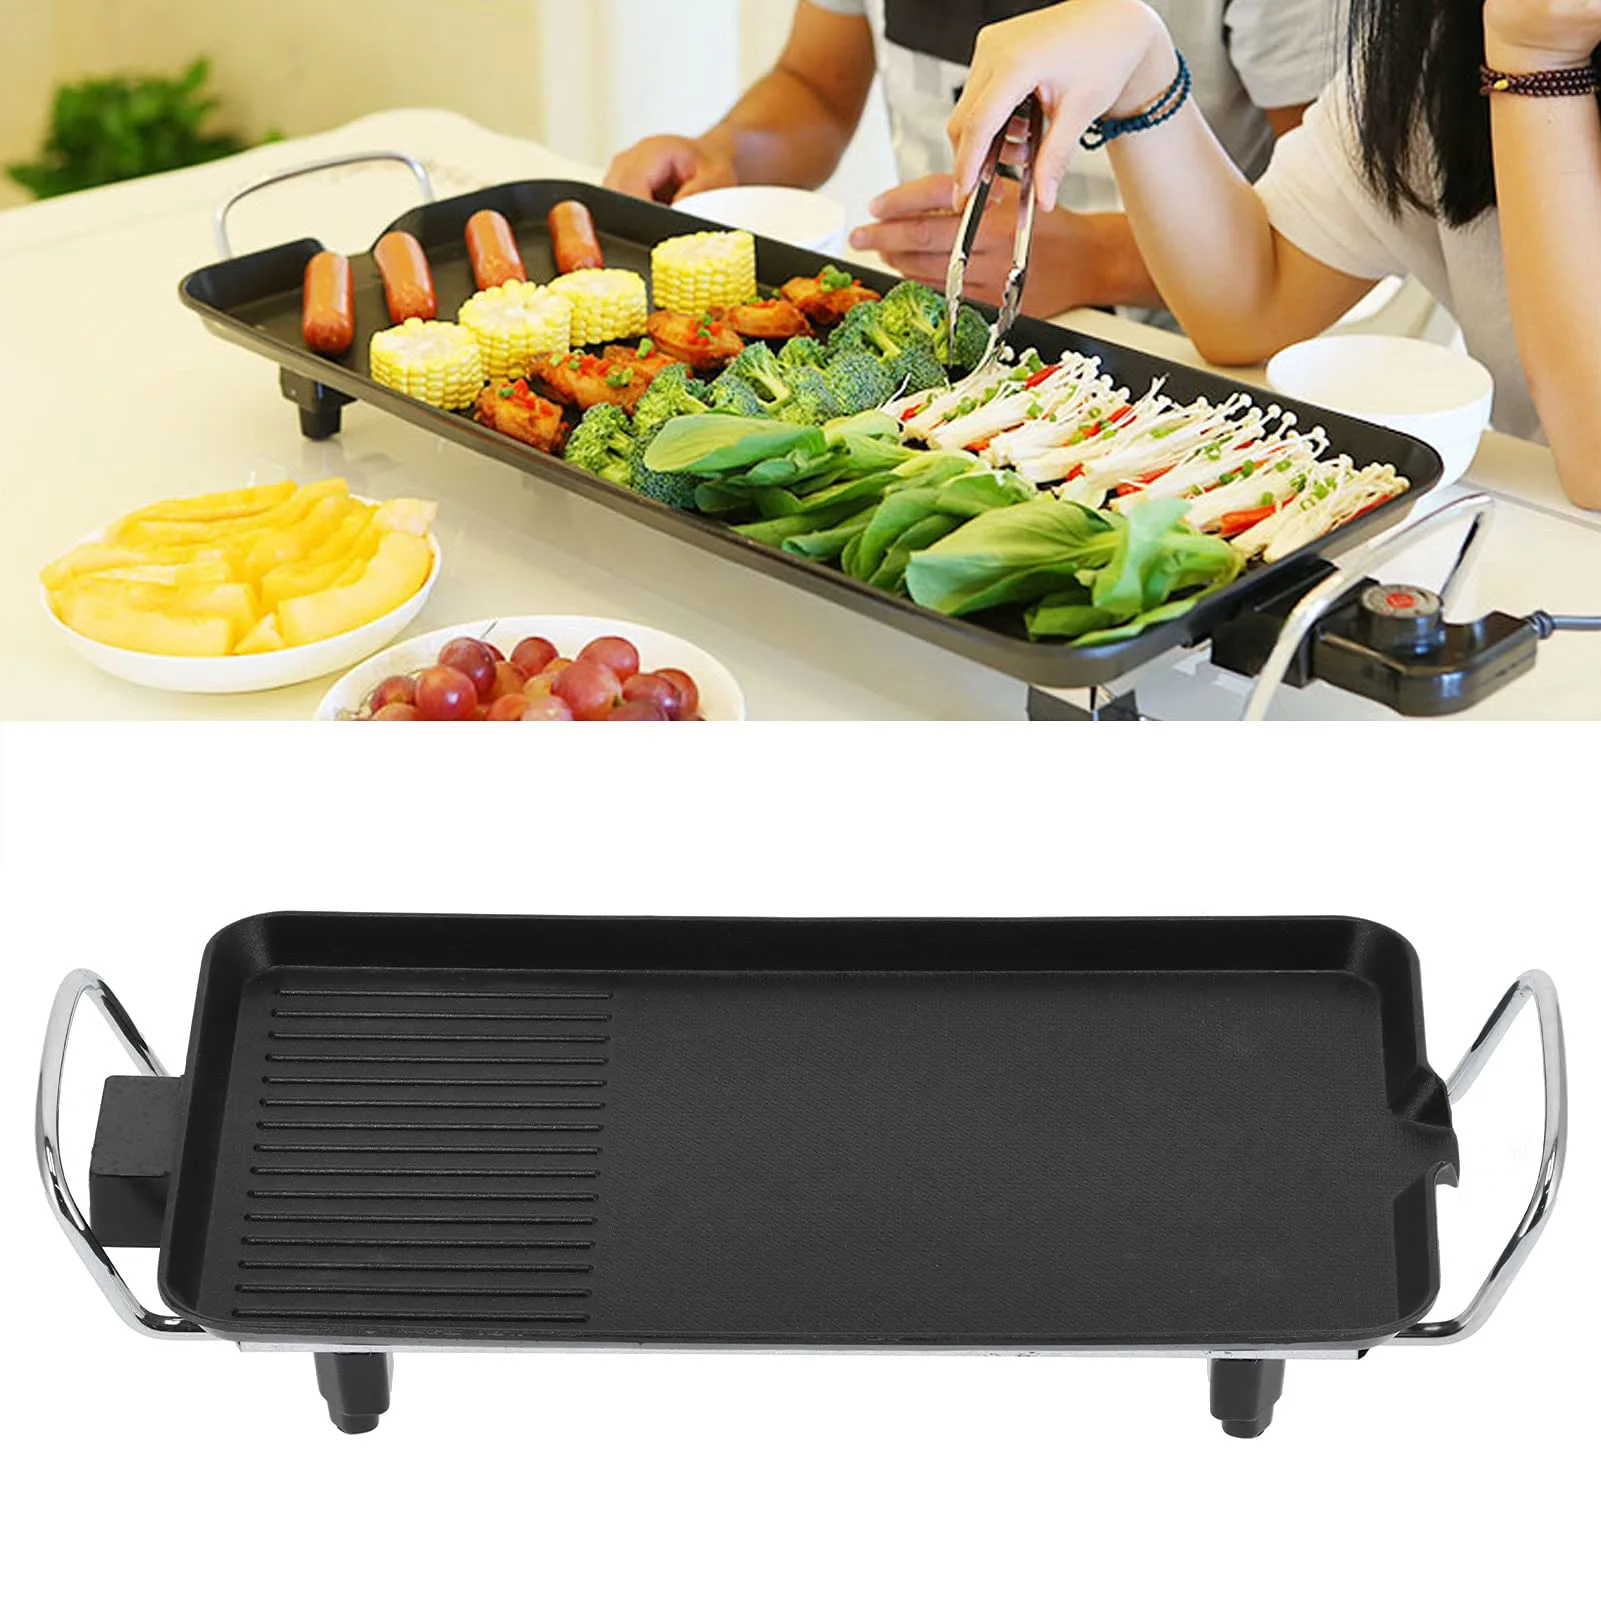 3 in 1 detachable electric grill